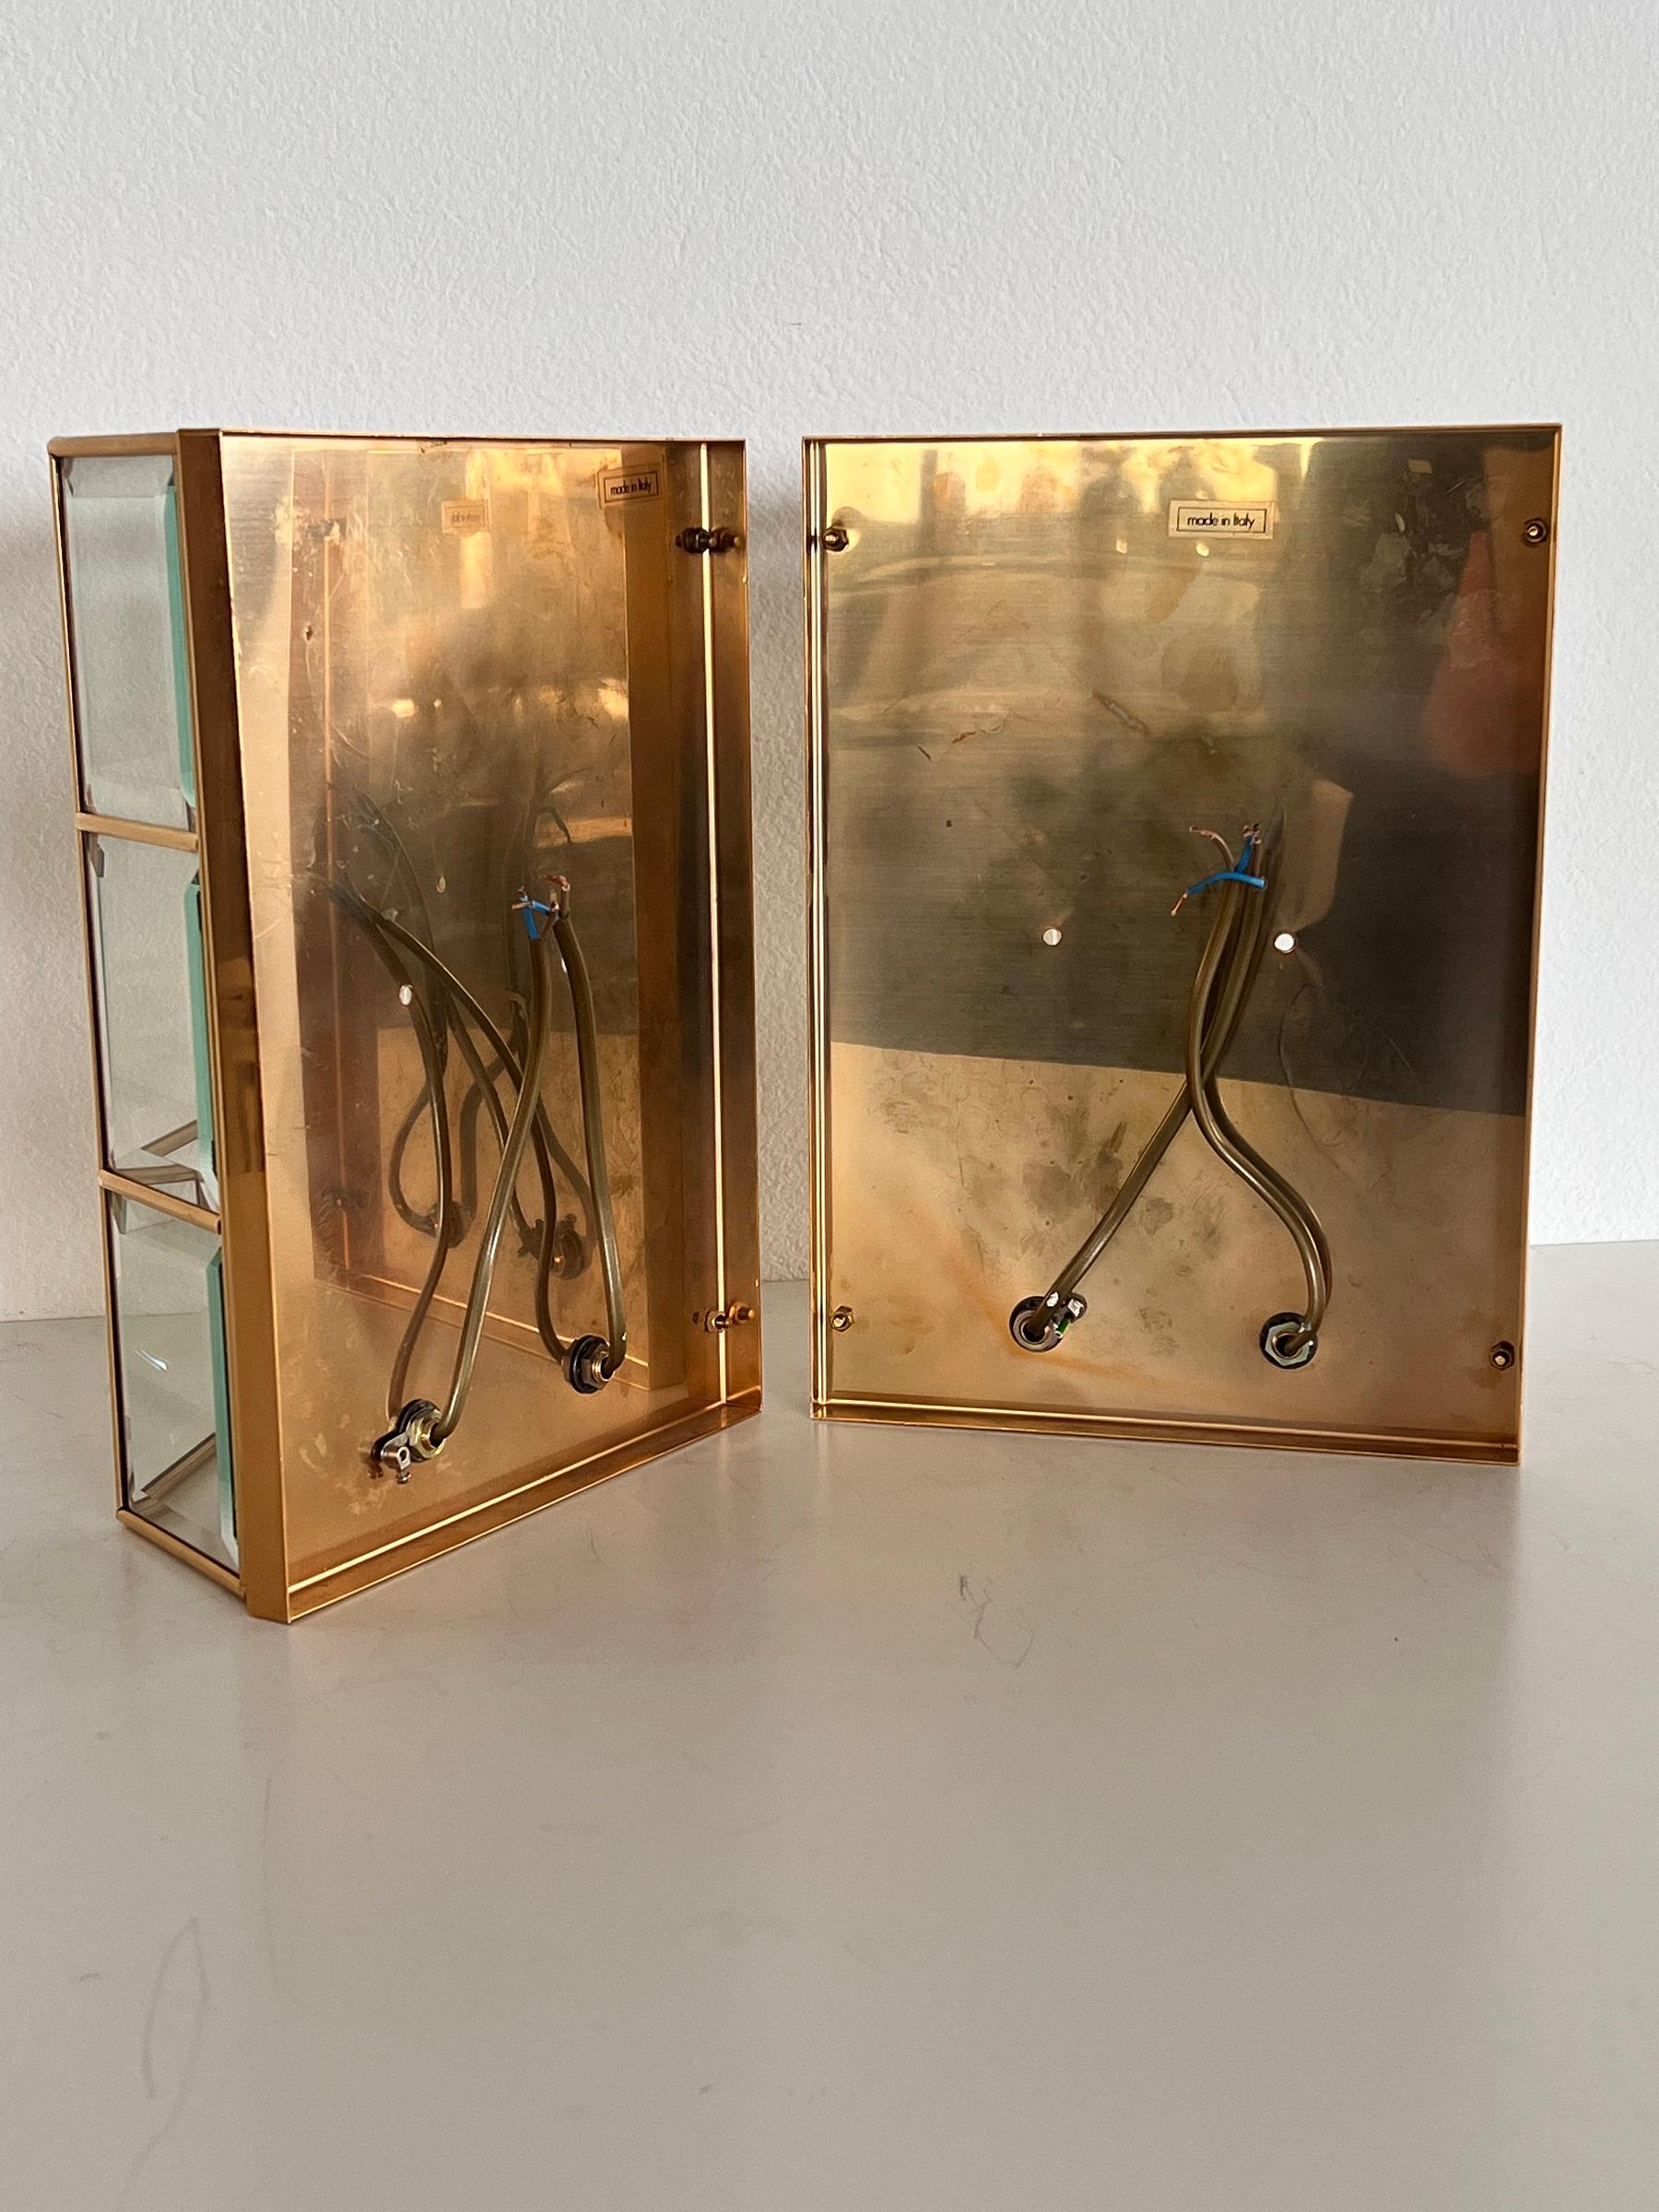 Italian Midcentury Golden Wall Sconces in Cut Glass with Brass Finish, 1970s For Sale 5